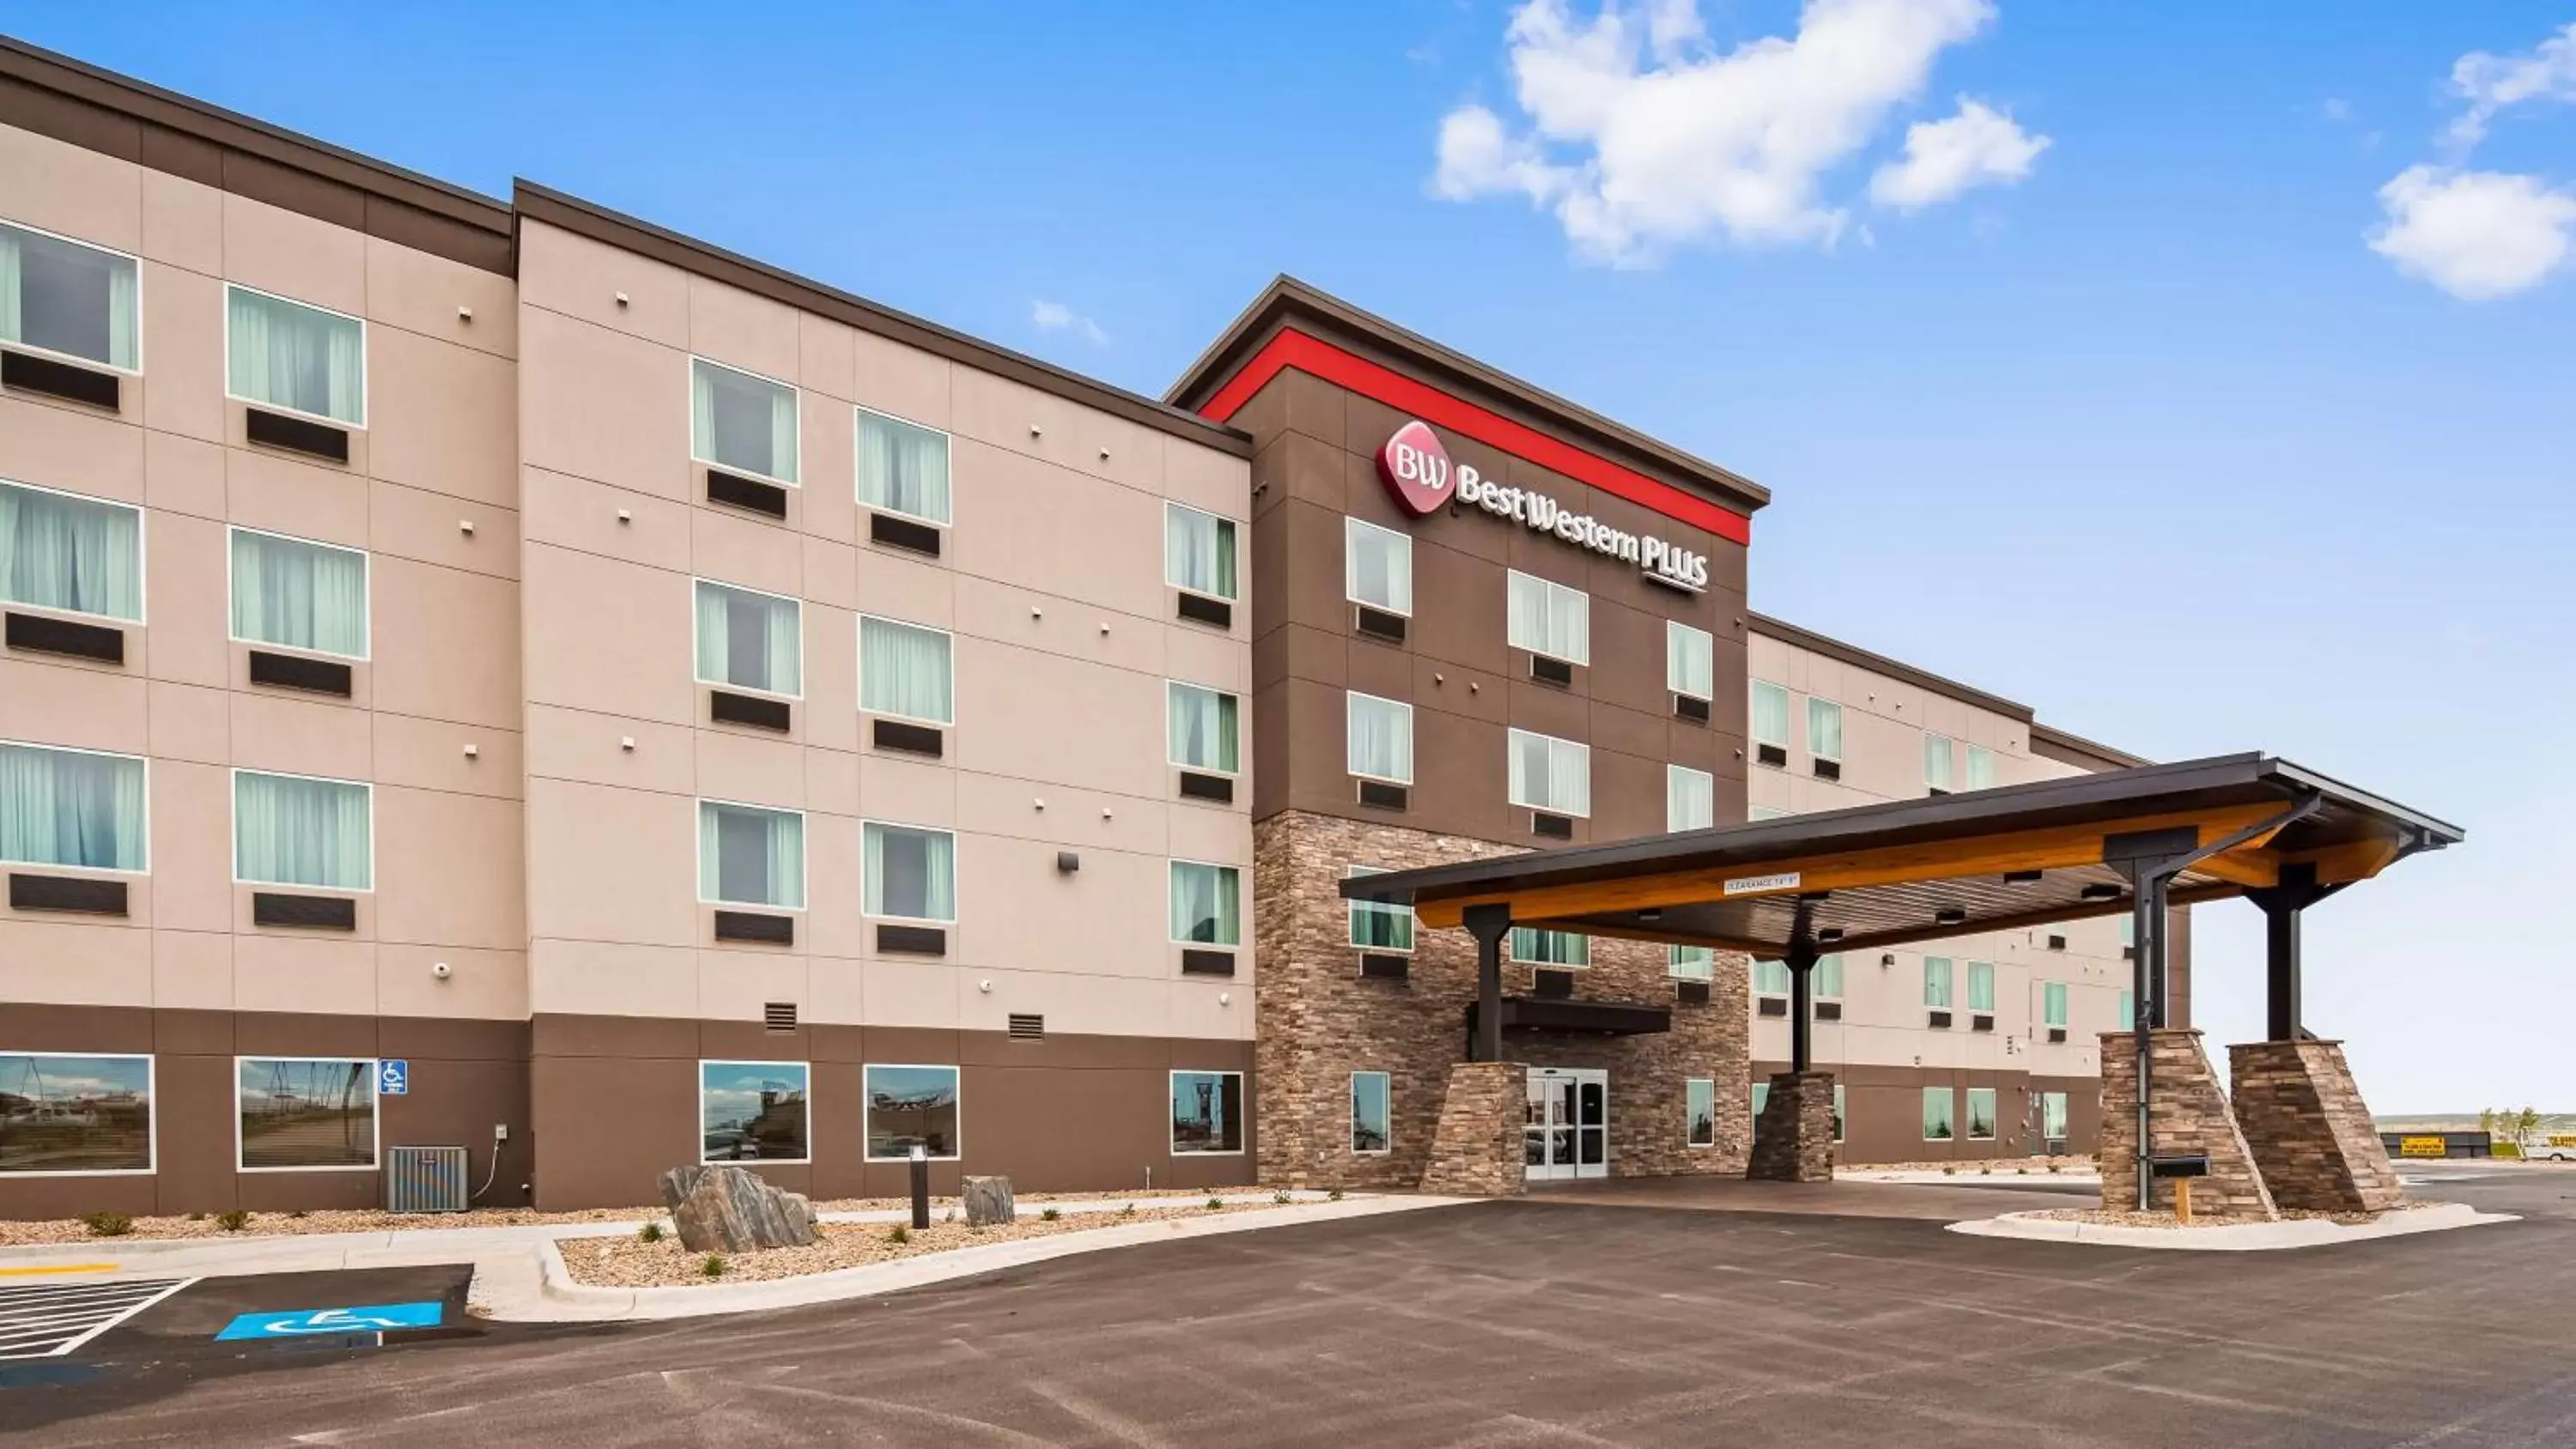 Property building in Best Western Plus Rapid City Rushmore